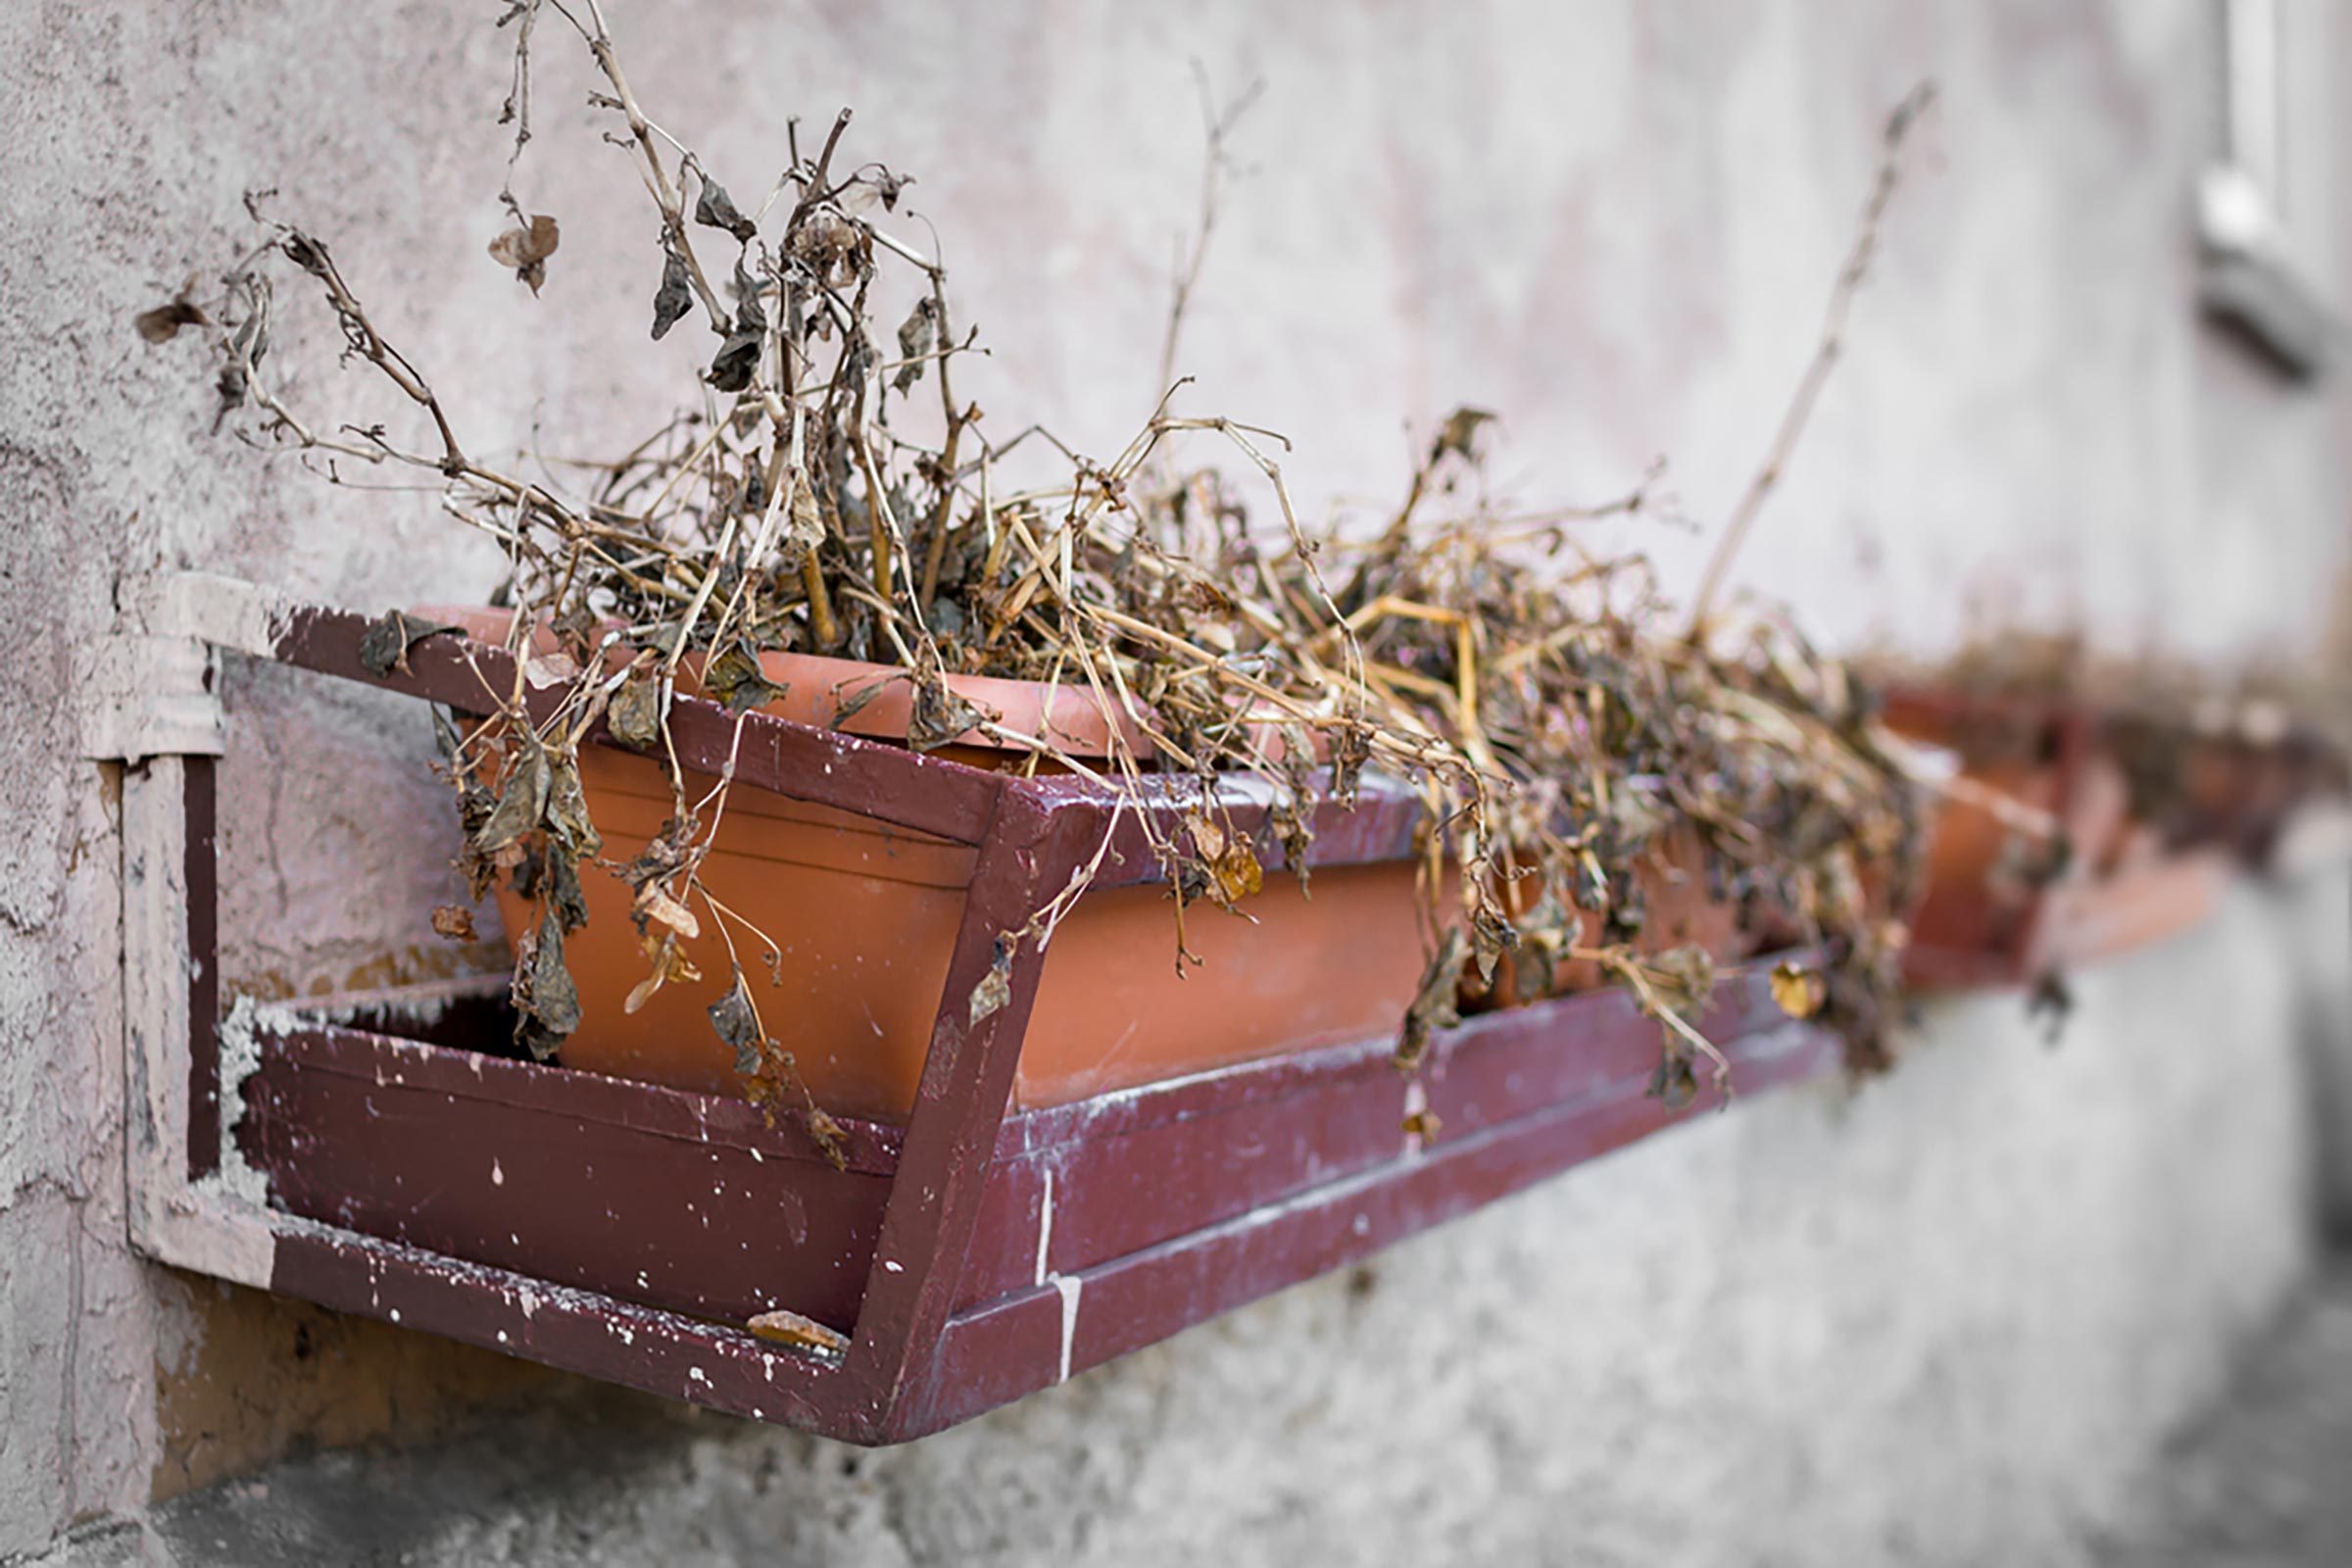 These Hacks Can Revive Almost Any Dead Plant | Reader's Digest